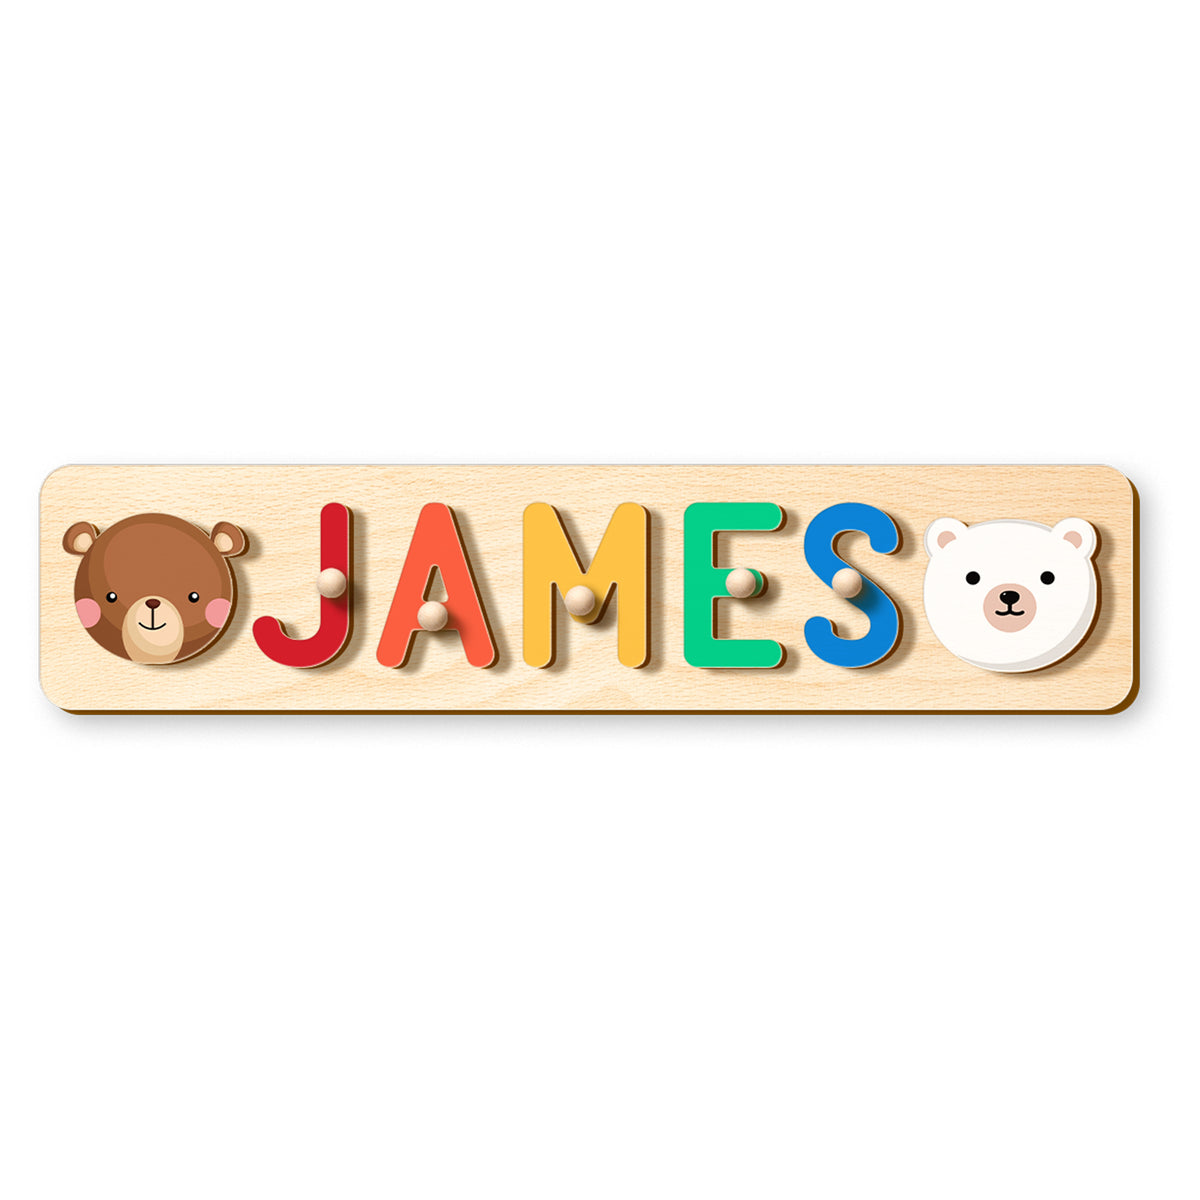 Customizedbee Personalized Name Puzzle,1 line,Wooden Puzzles for Toddlers 1-3, Easter Gifts